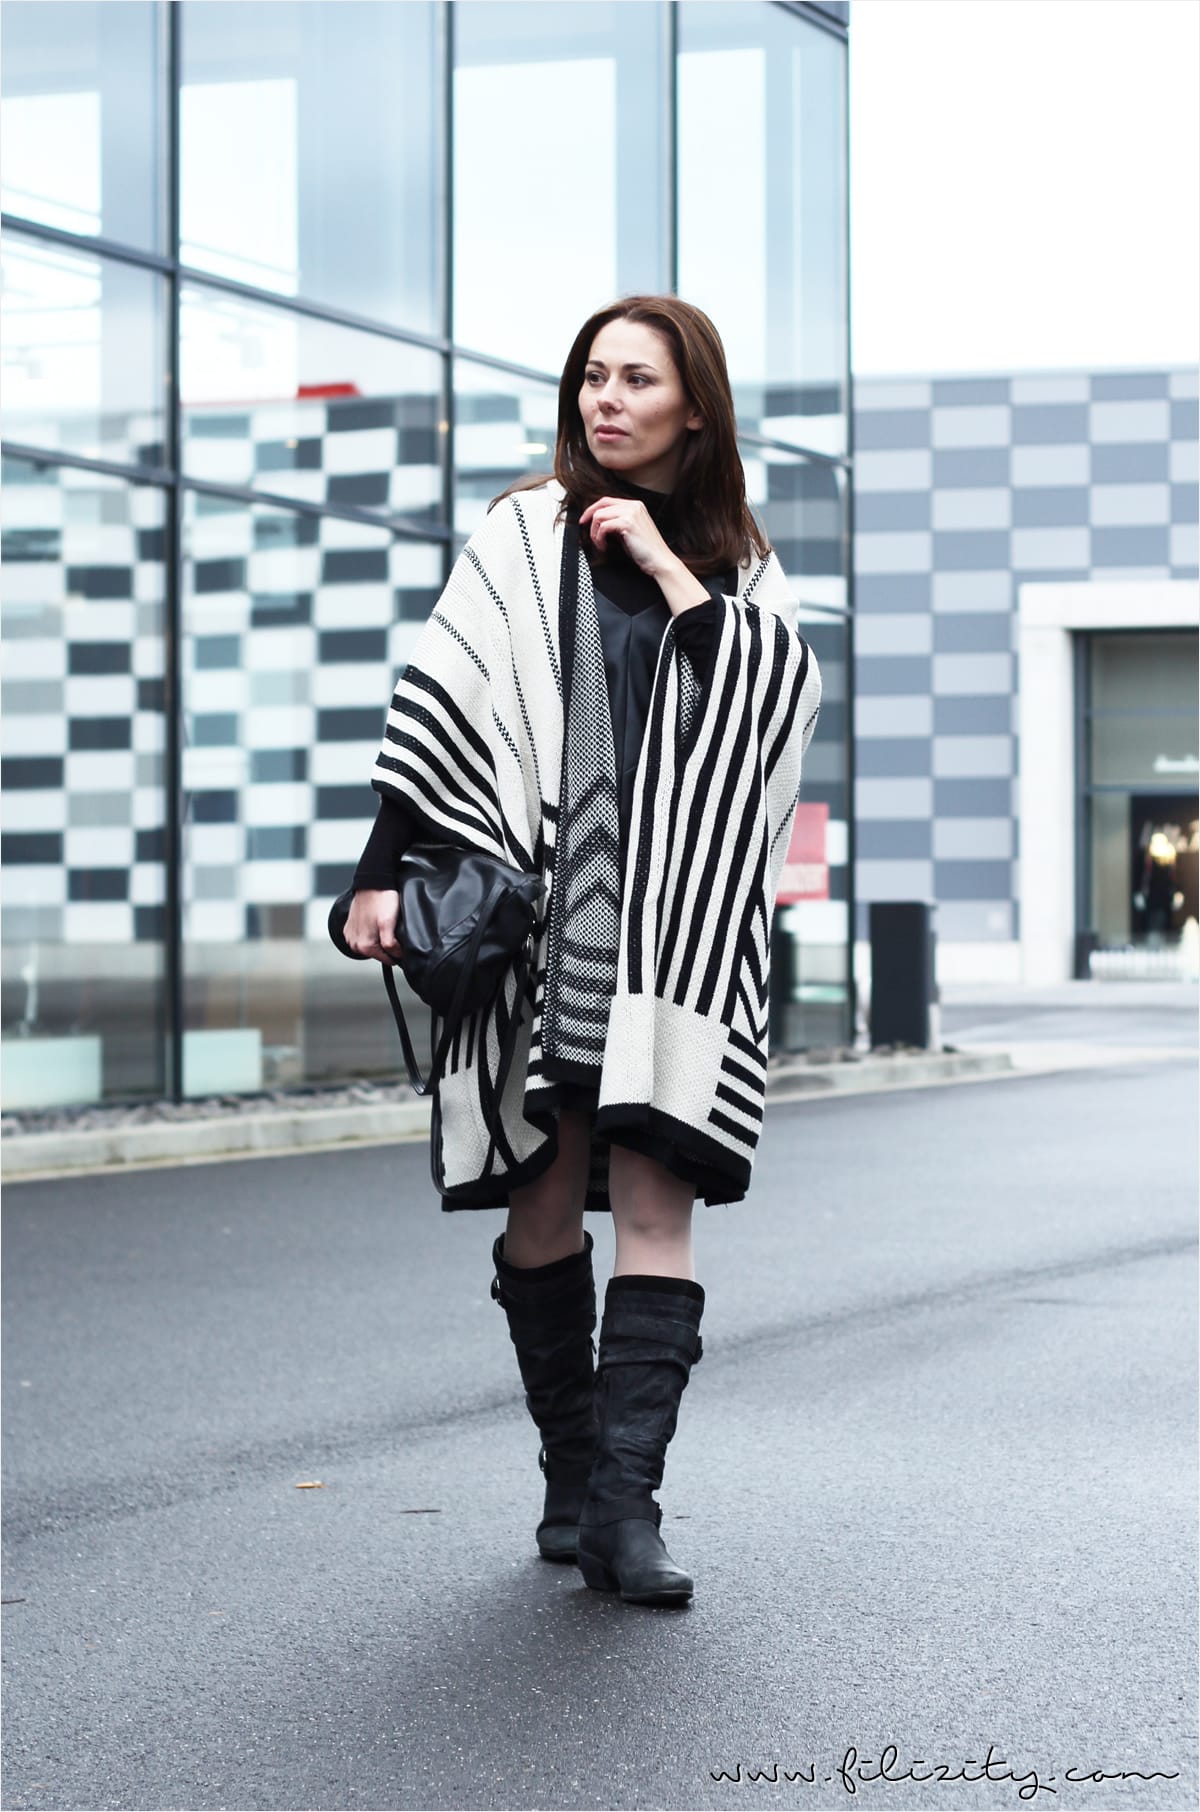 Winter-Outfit mit Basefield-Cape